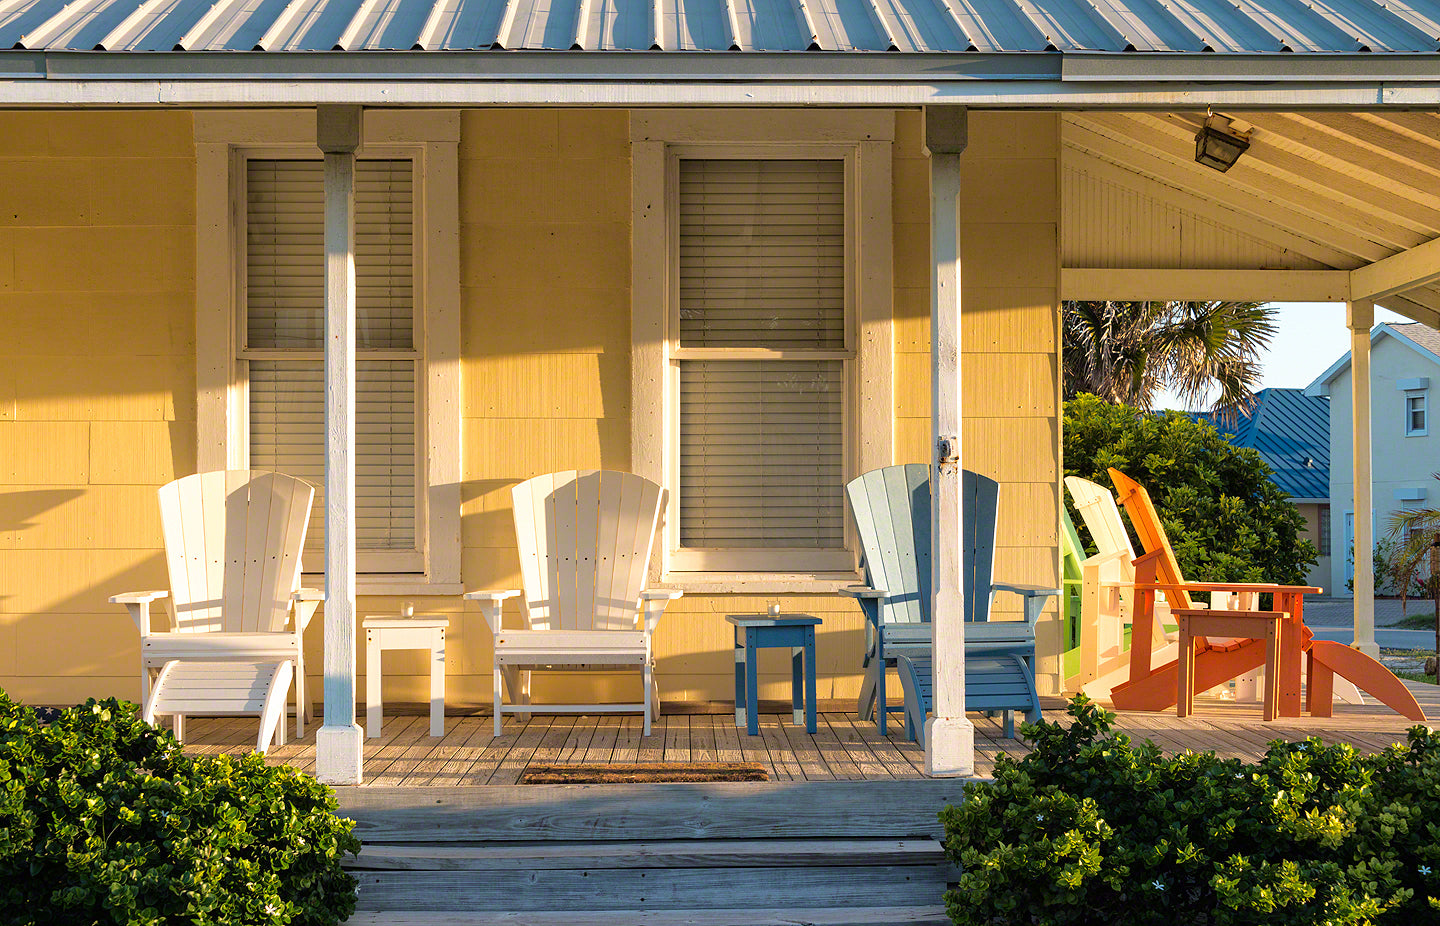 A photo of Adirondack Chairs on the porch of an old Florida home